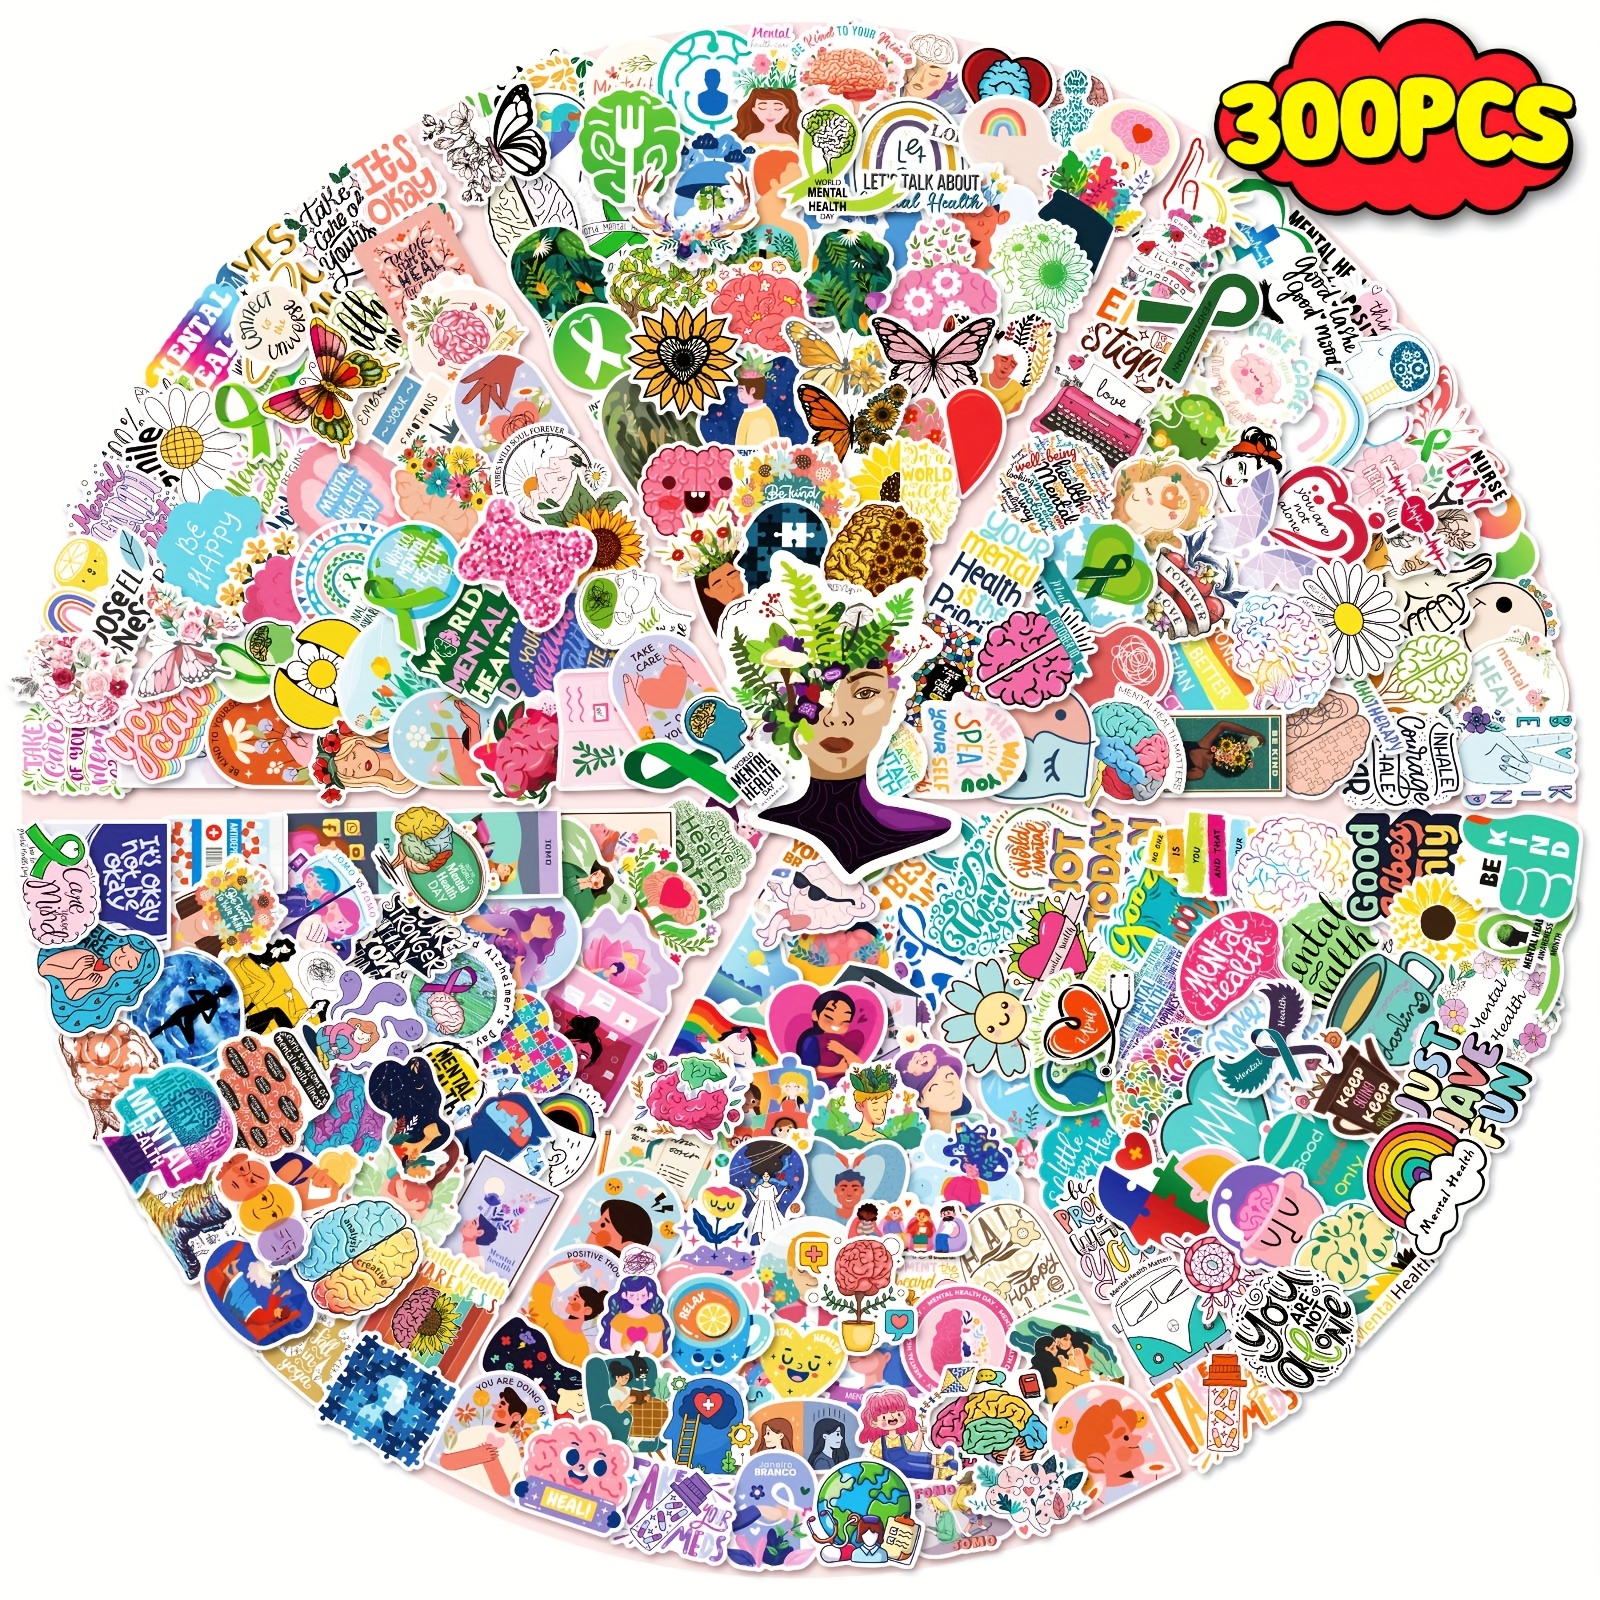 Stickers for Adults 300PCS Funny Stickers for Adults/Teens,Adult